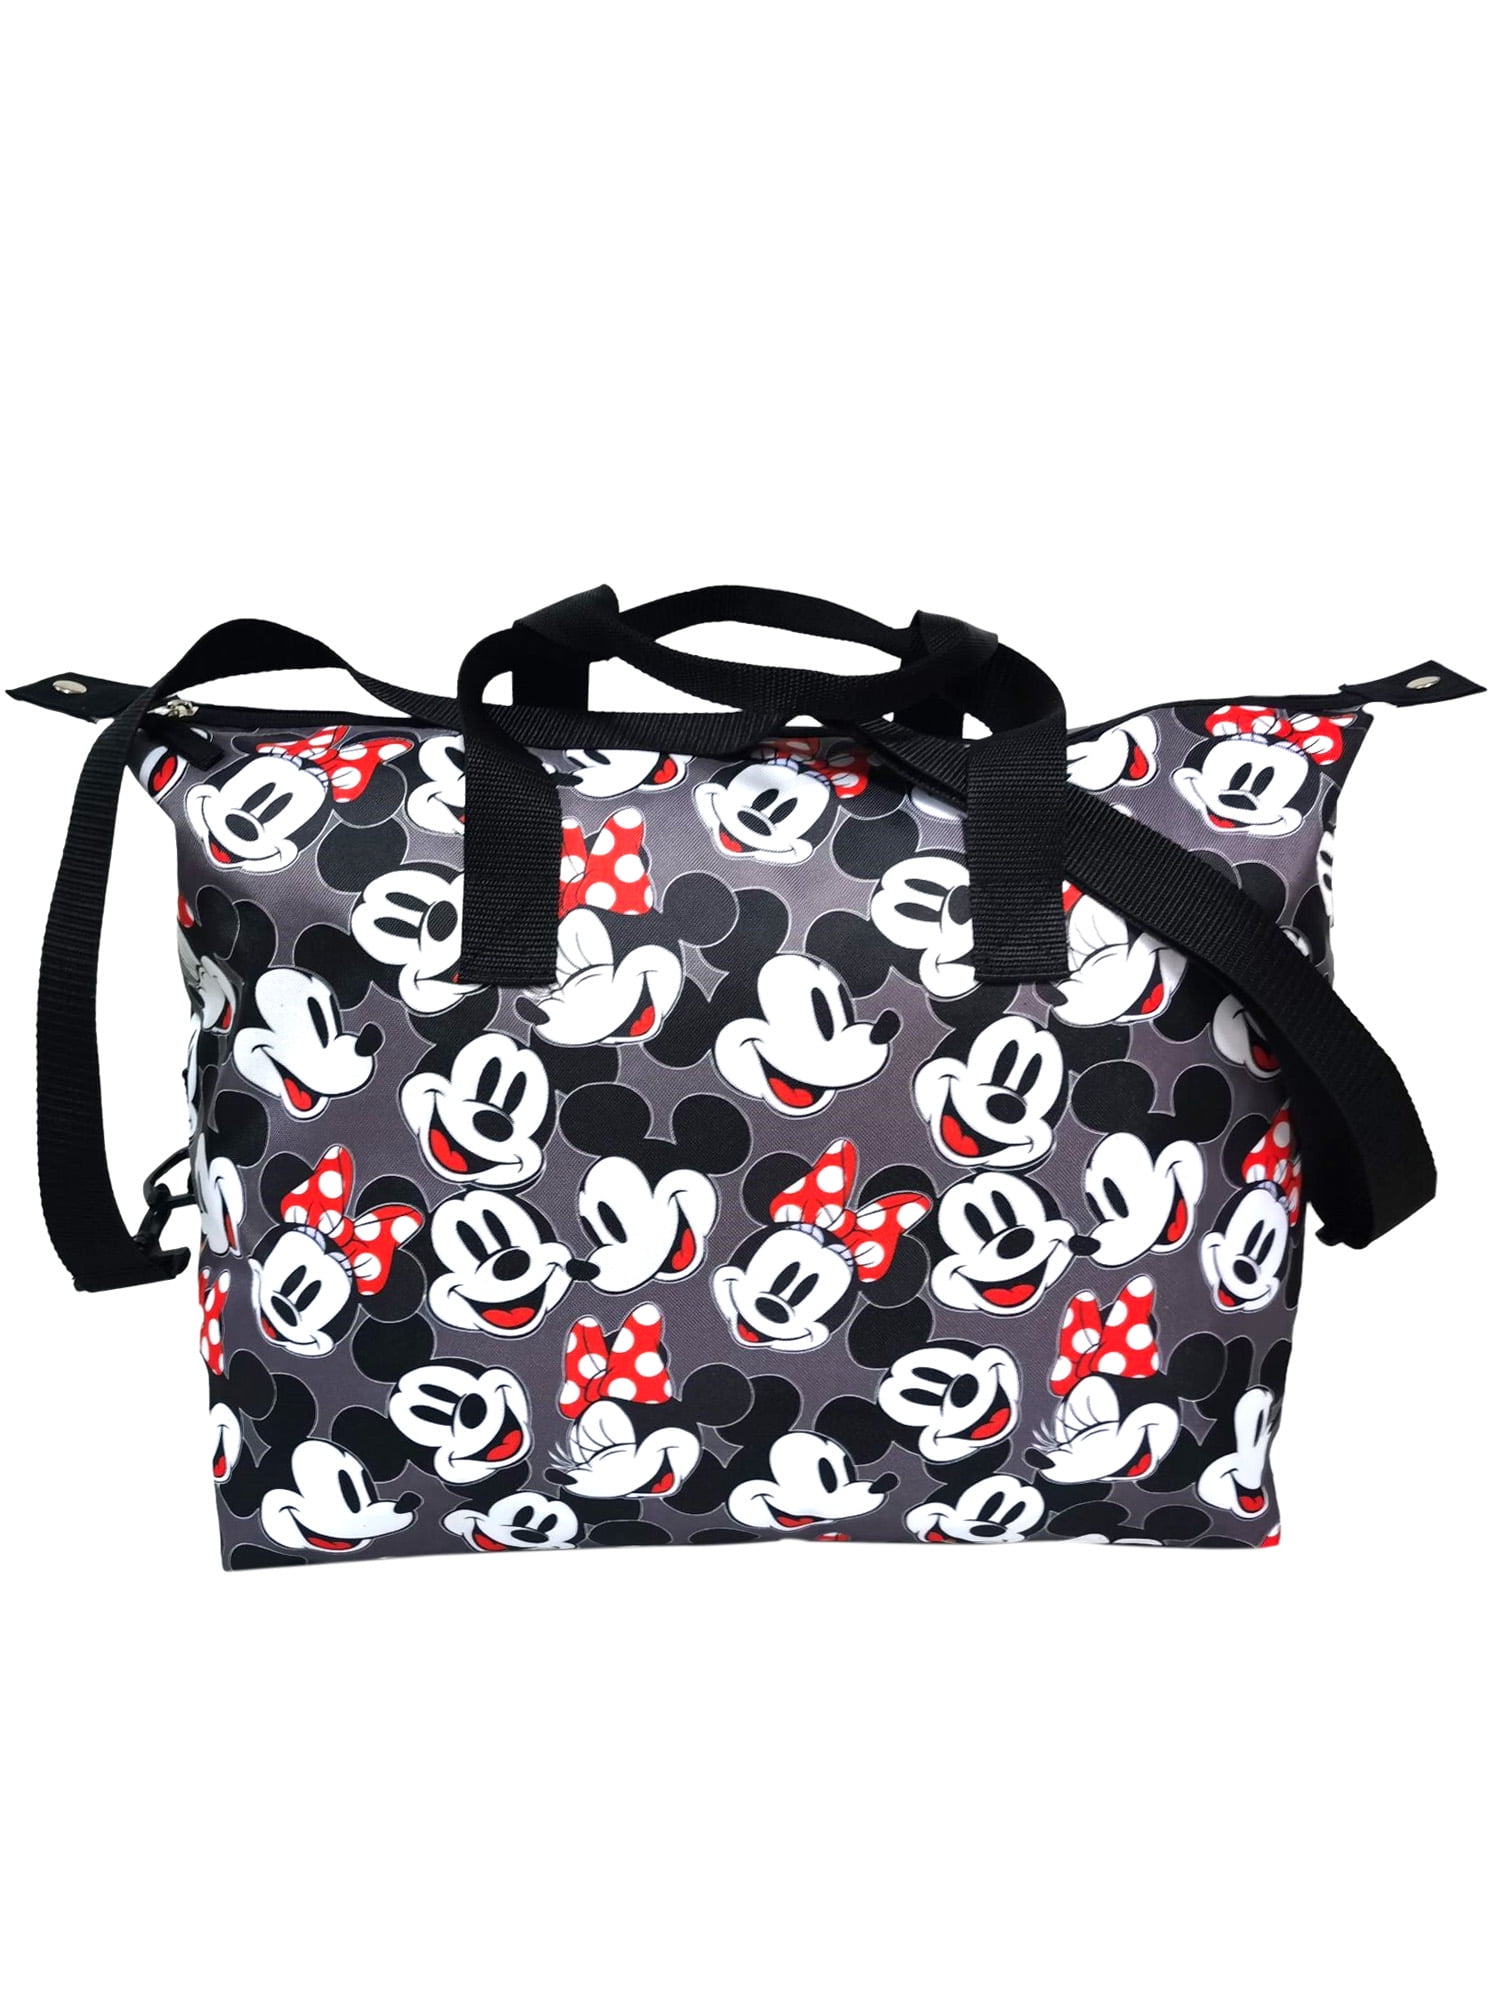 Women's Clutch Fashion Shoulder Bag Mickey Minnie Mouse SALE FREE SHIPPING 